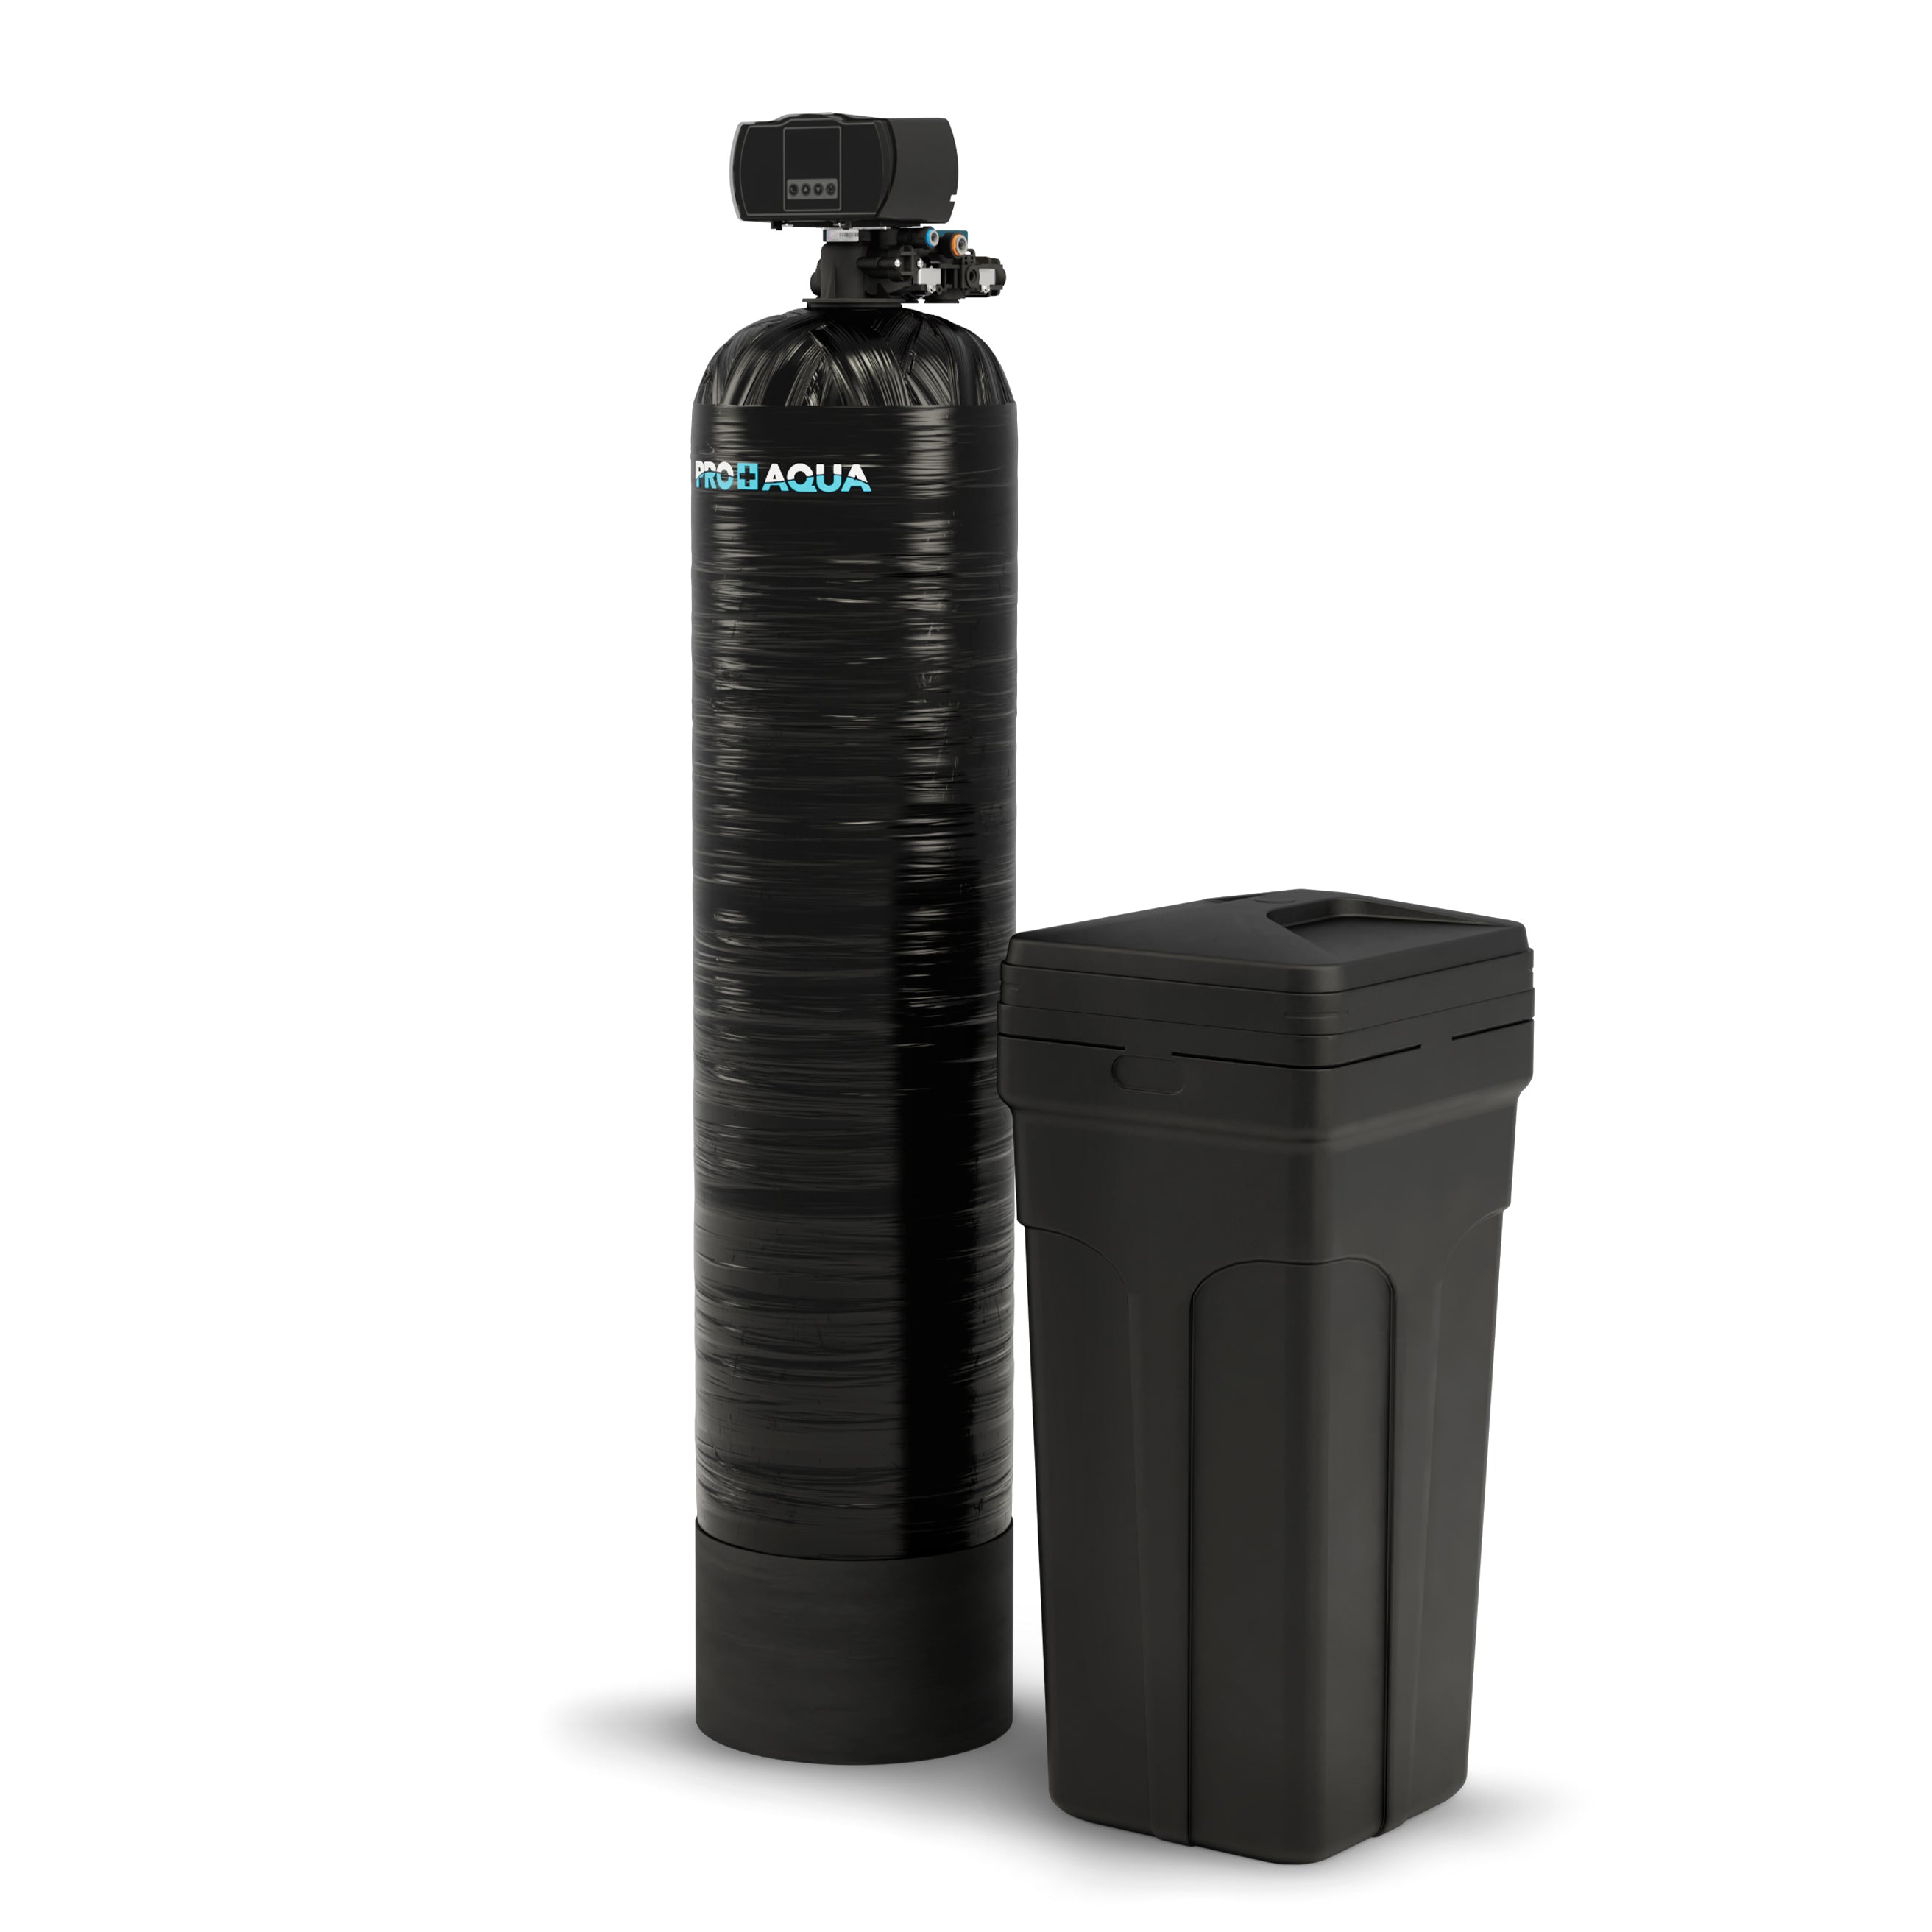 This portable water softener is the best purchase I've made so far